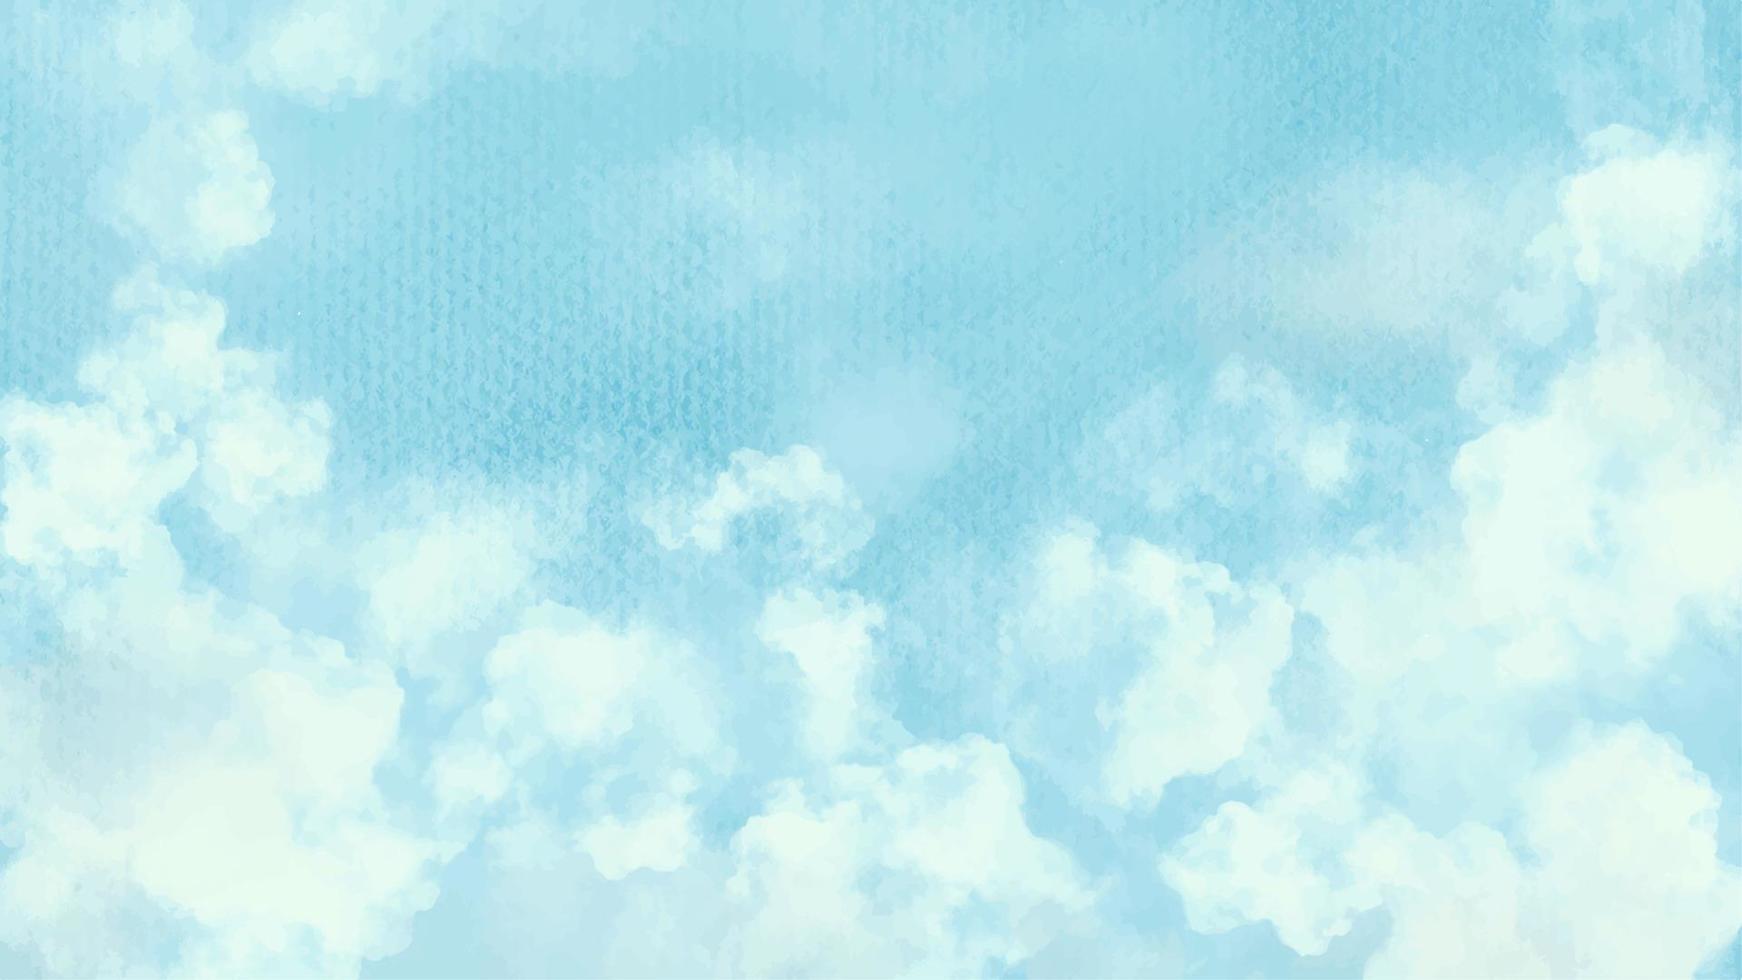 Realistic blue sky with clouds vector